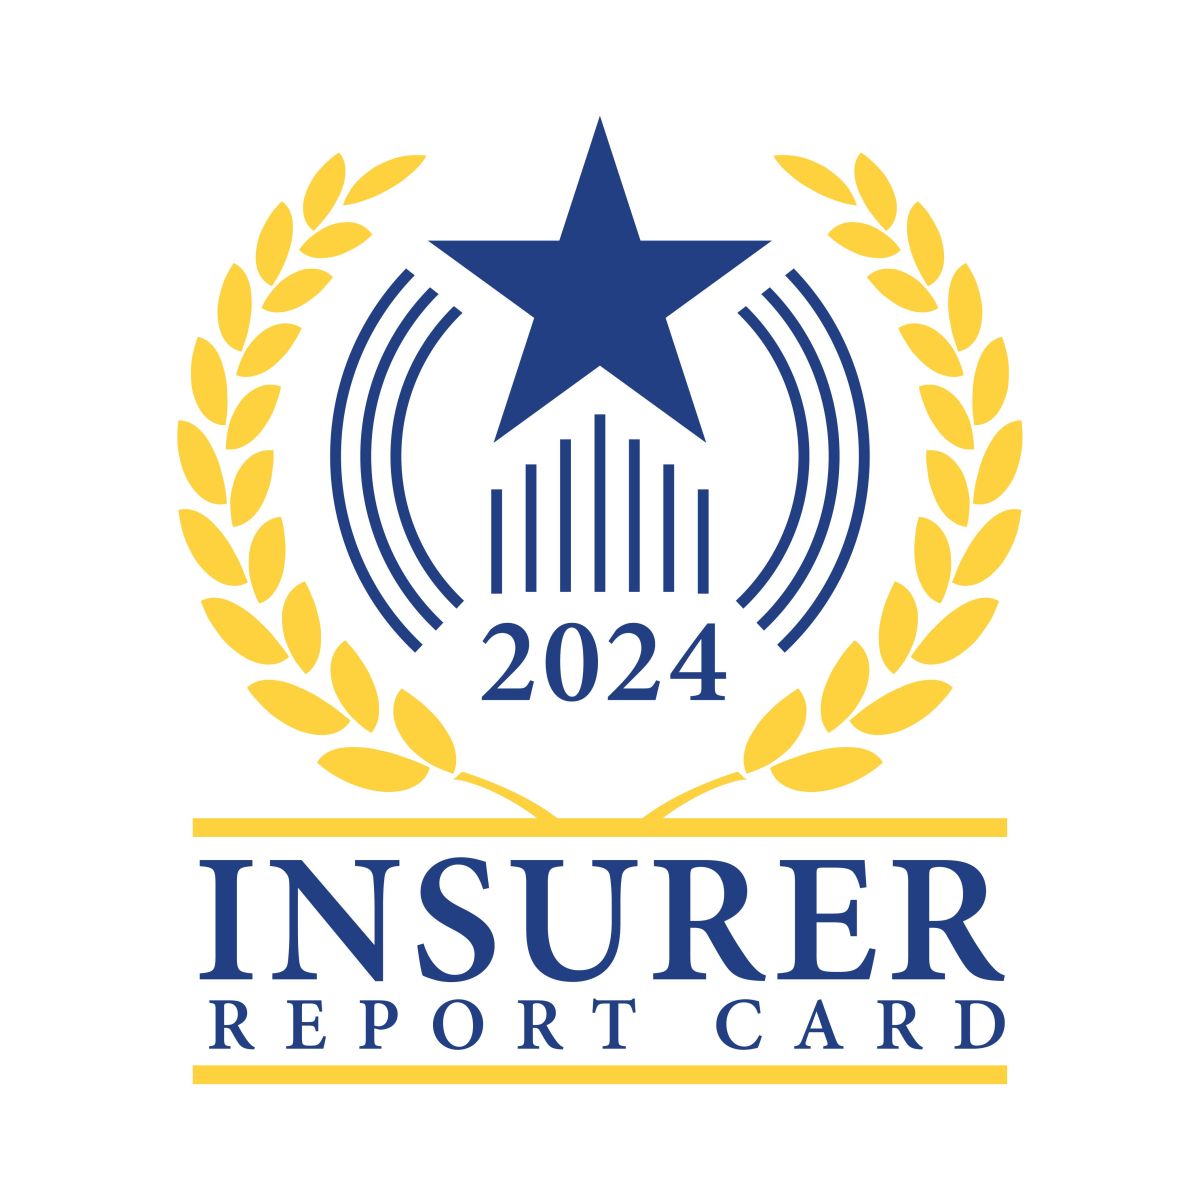 Regional Auto Insurance Carriers Outshine National Giants in Insurer Report Card